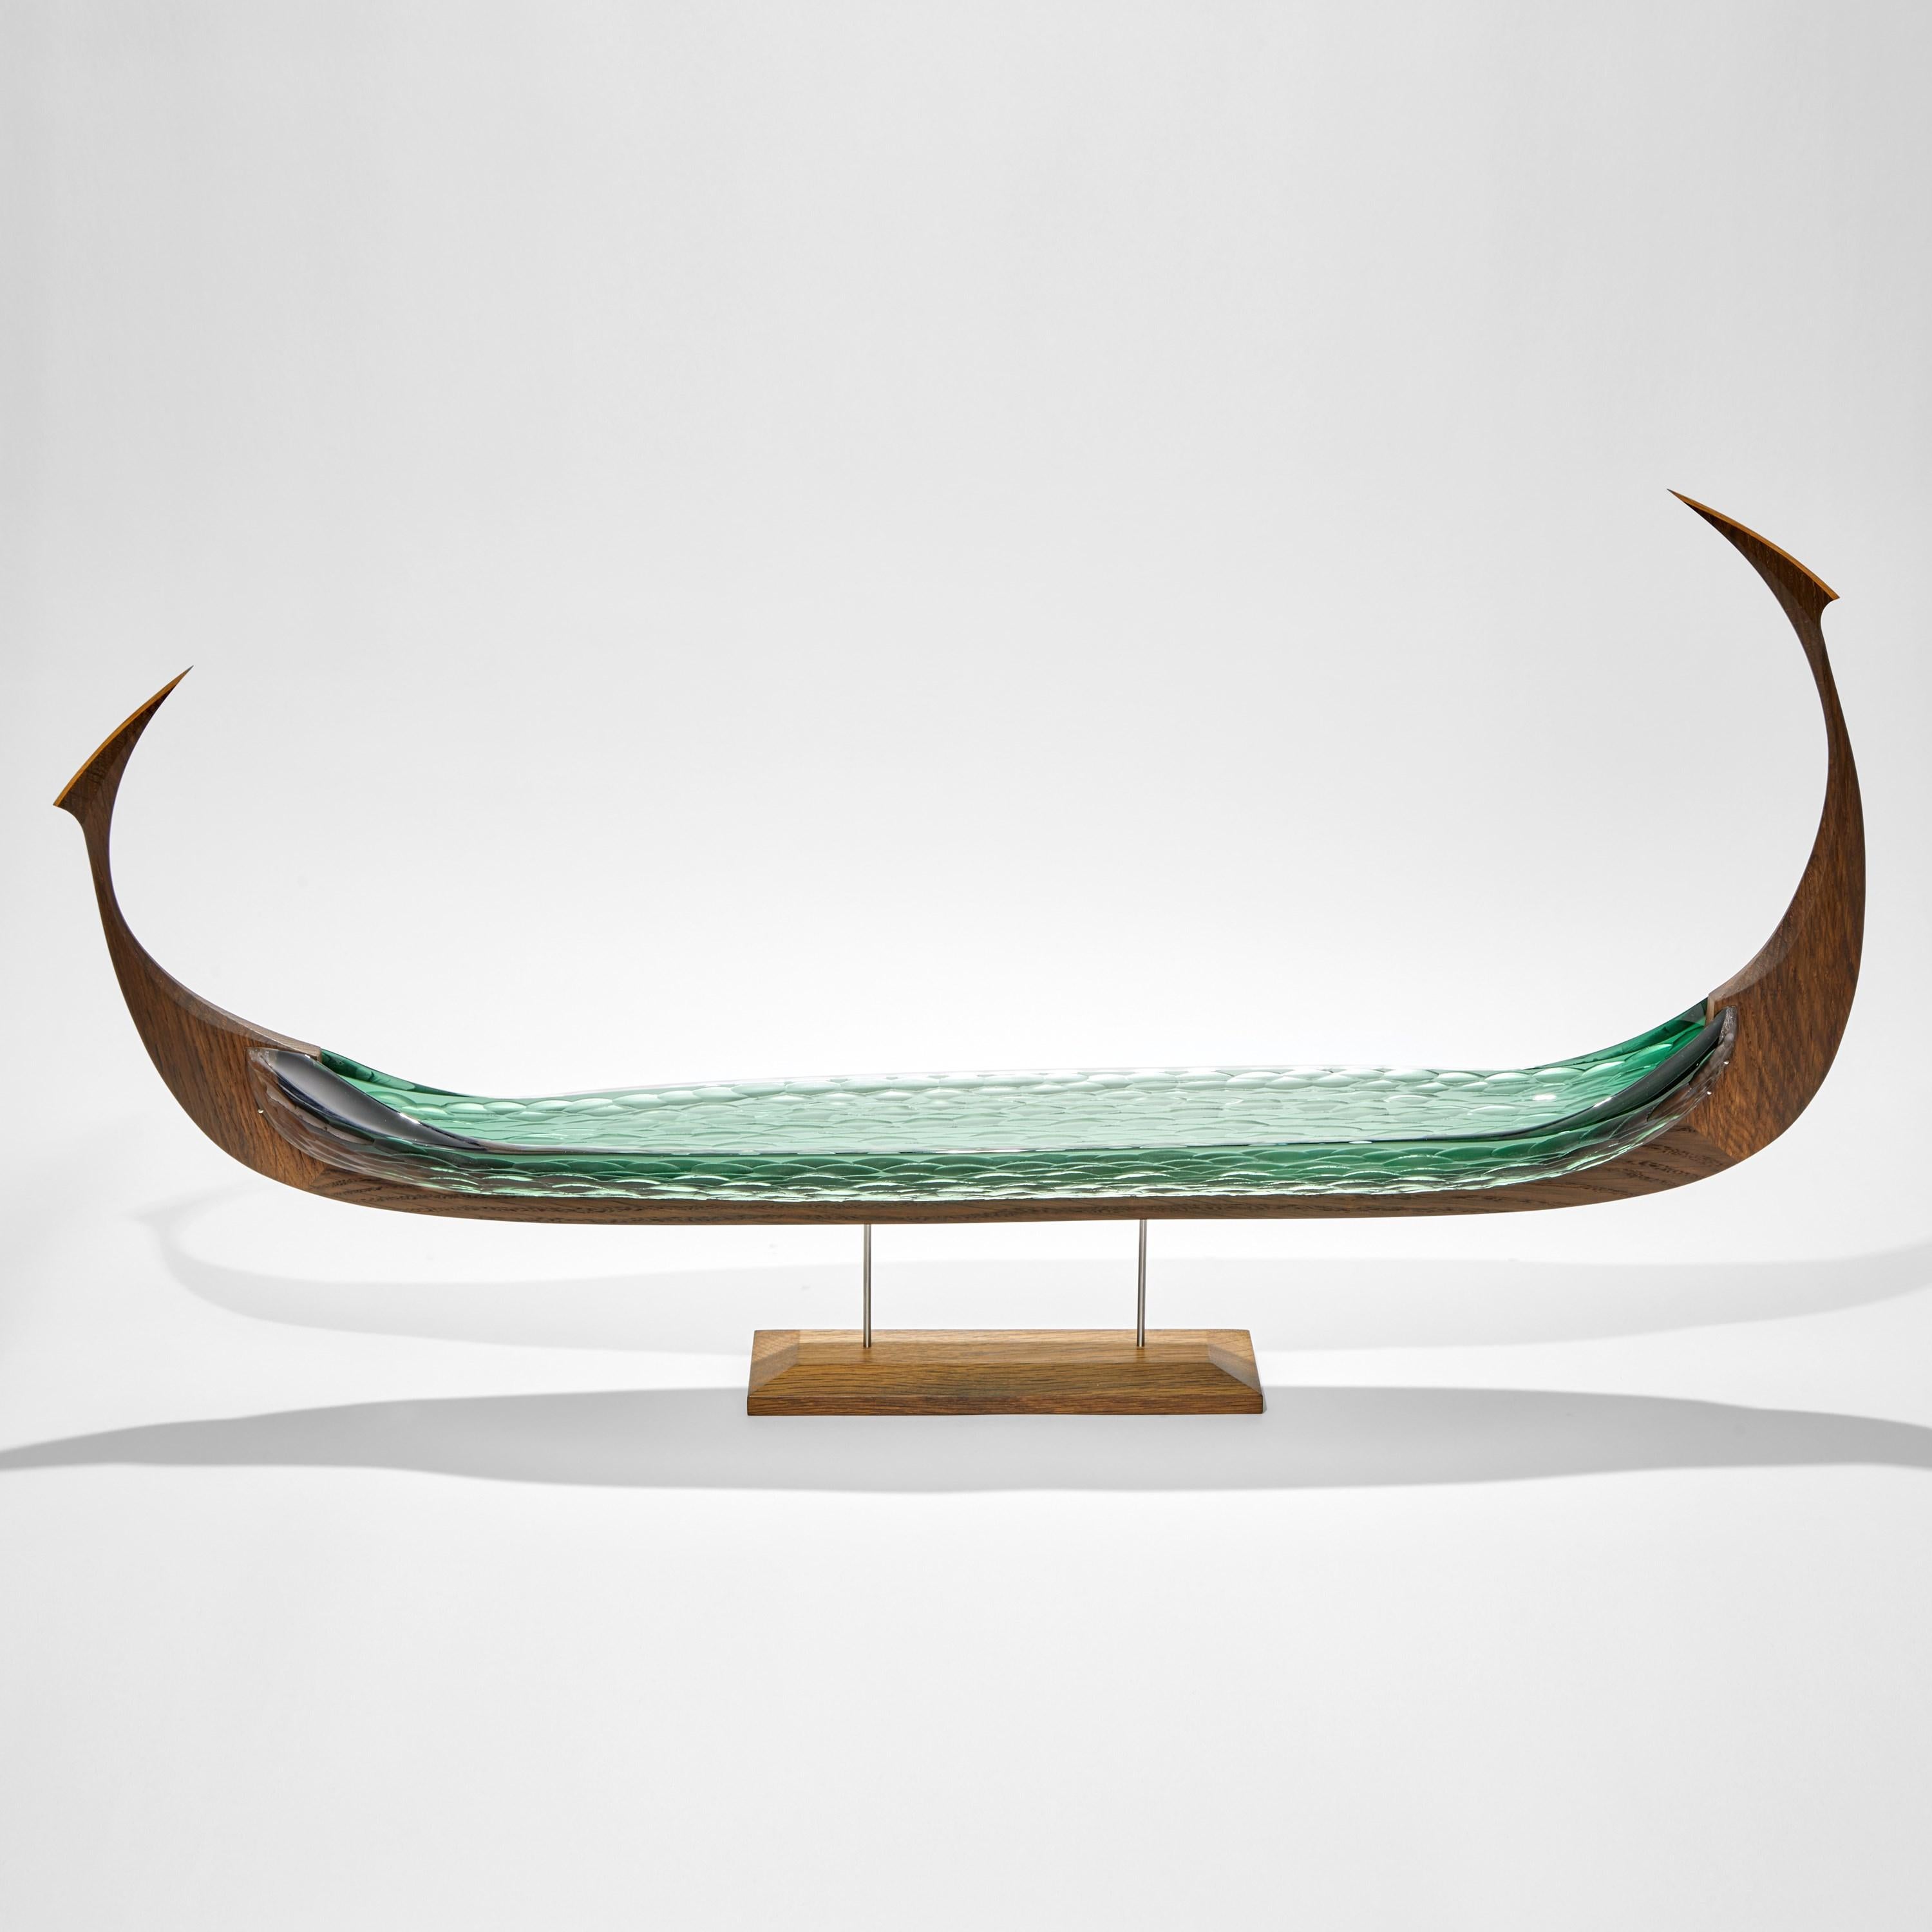 'Askr' from the Glasskibe Collection is a unique glass and oak sculpture by the Danish and British artists, Backhaus & Brown and Egeværk.

The title explained by the artists;

 “ASKR – ’ash’ (wood) in Norse. According to Norse mythology,